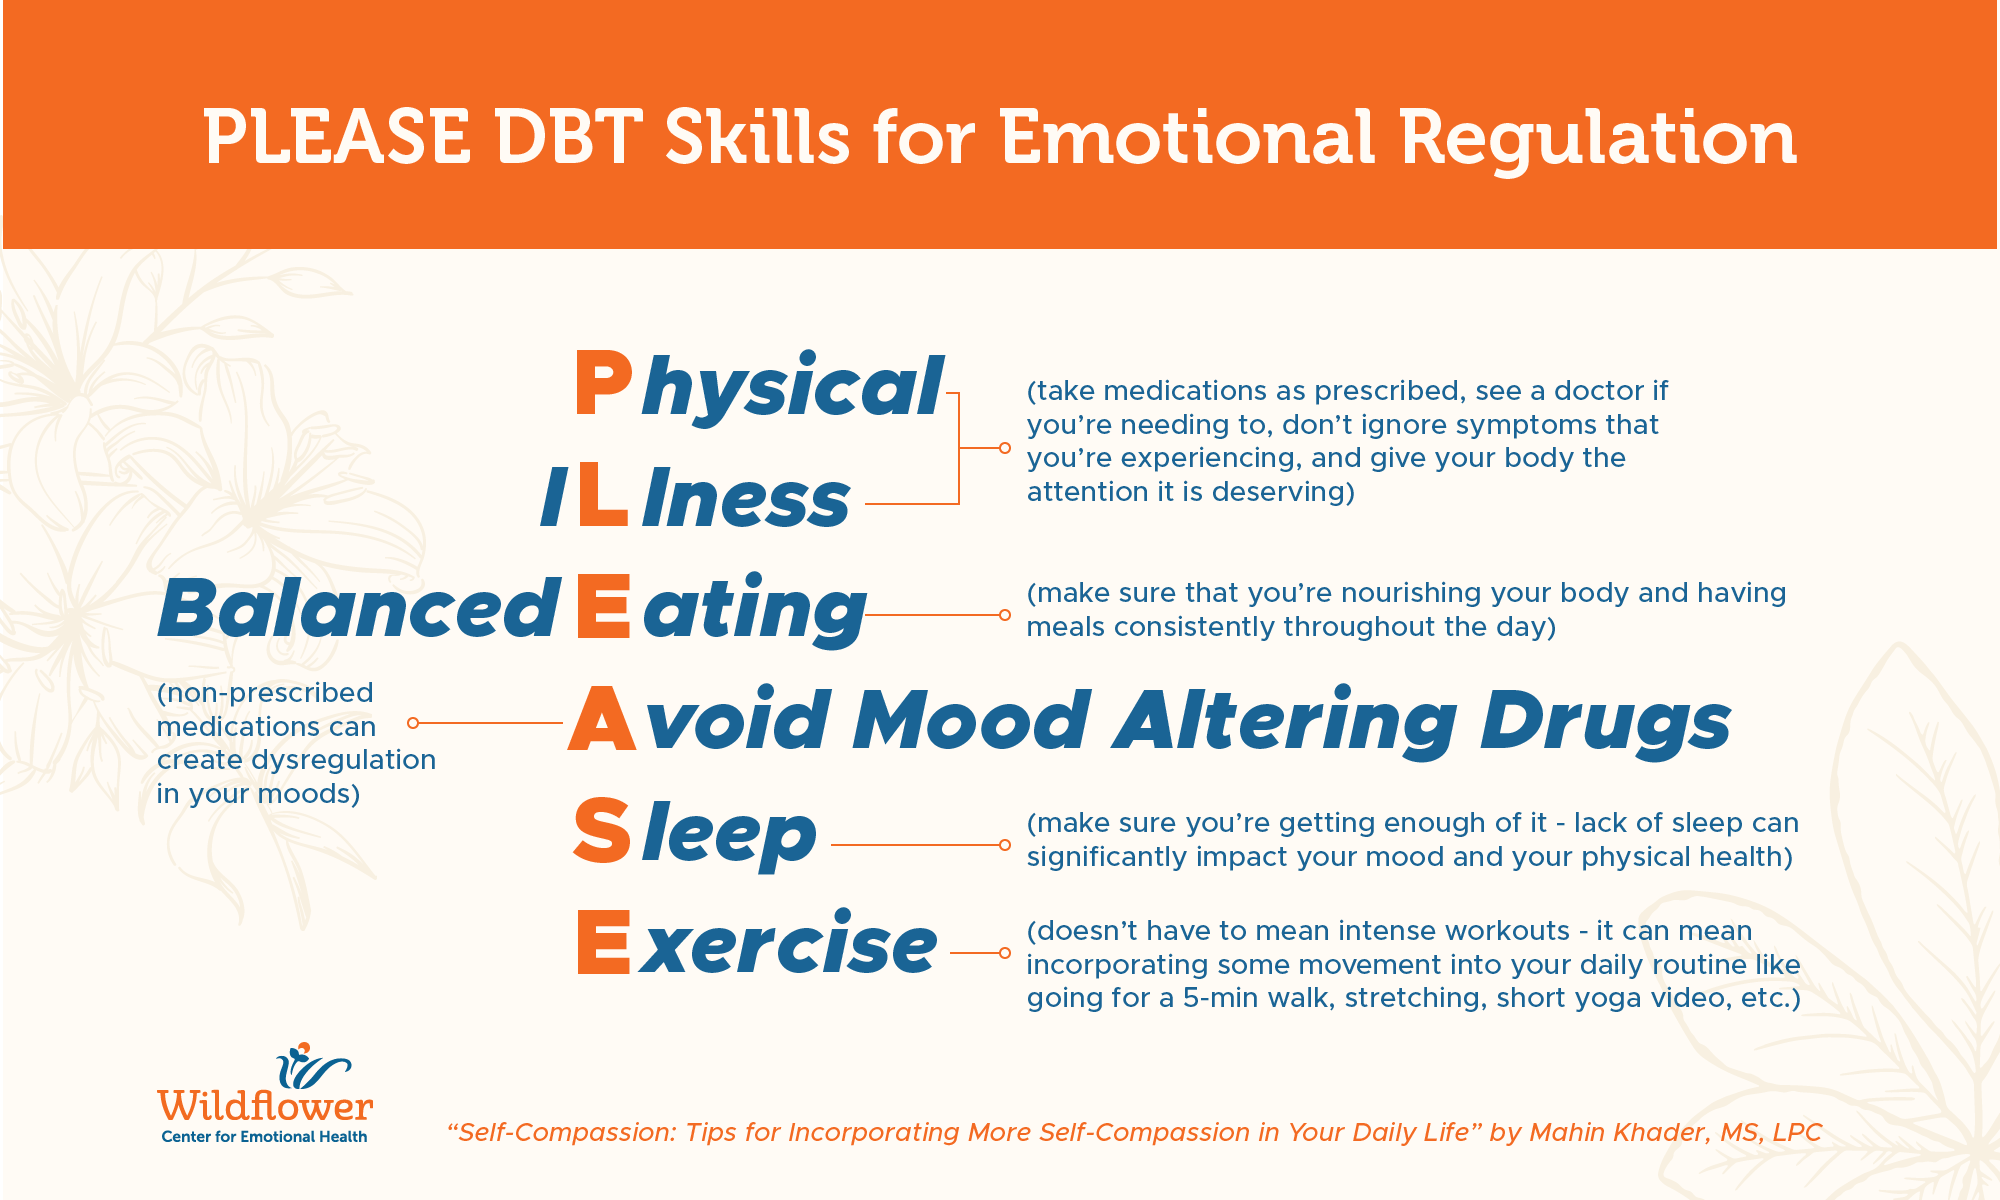 Blue, Orange and tan informational graphic about PLEASE DBT skills for emotional regulation. PLEASE stands for Physical Illness, Balanced Eating, Avoid mood Altering Drugs, Sleep, and Exercise.